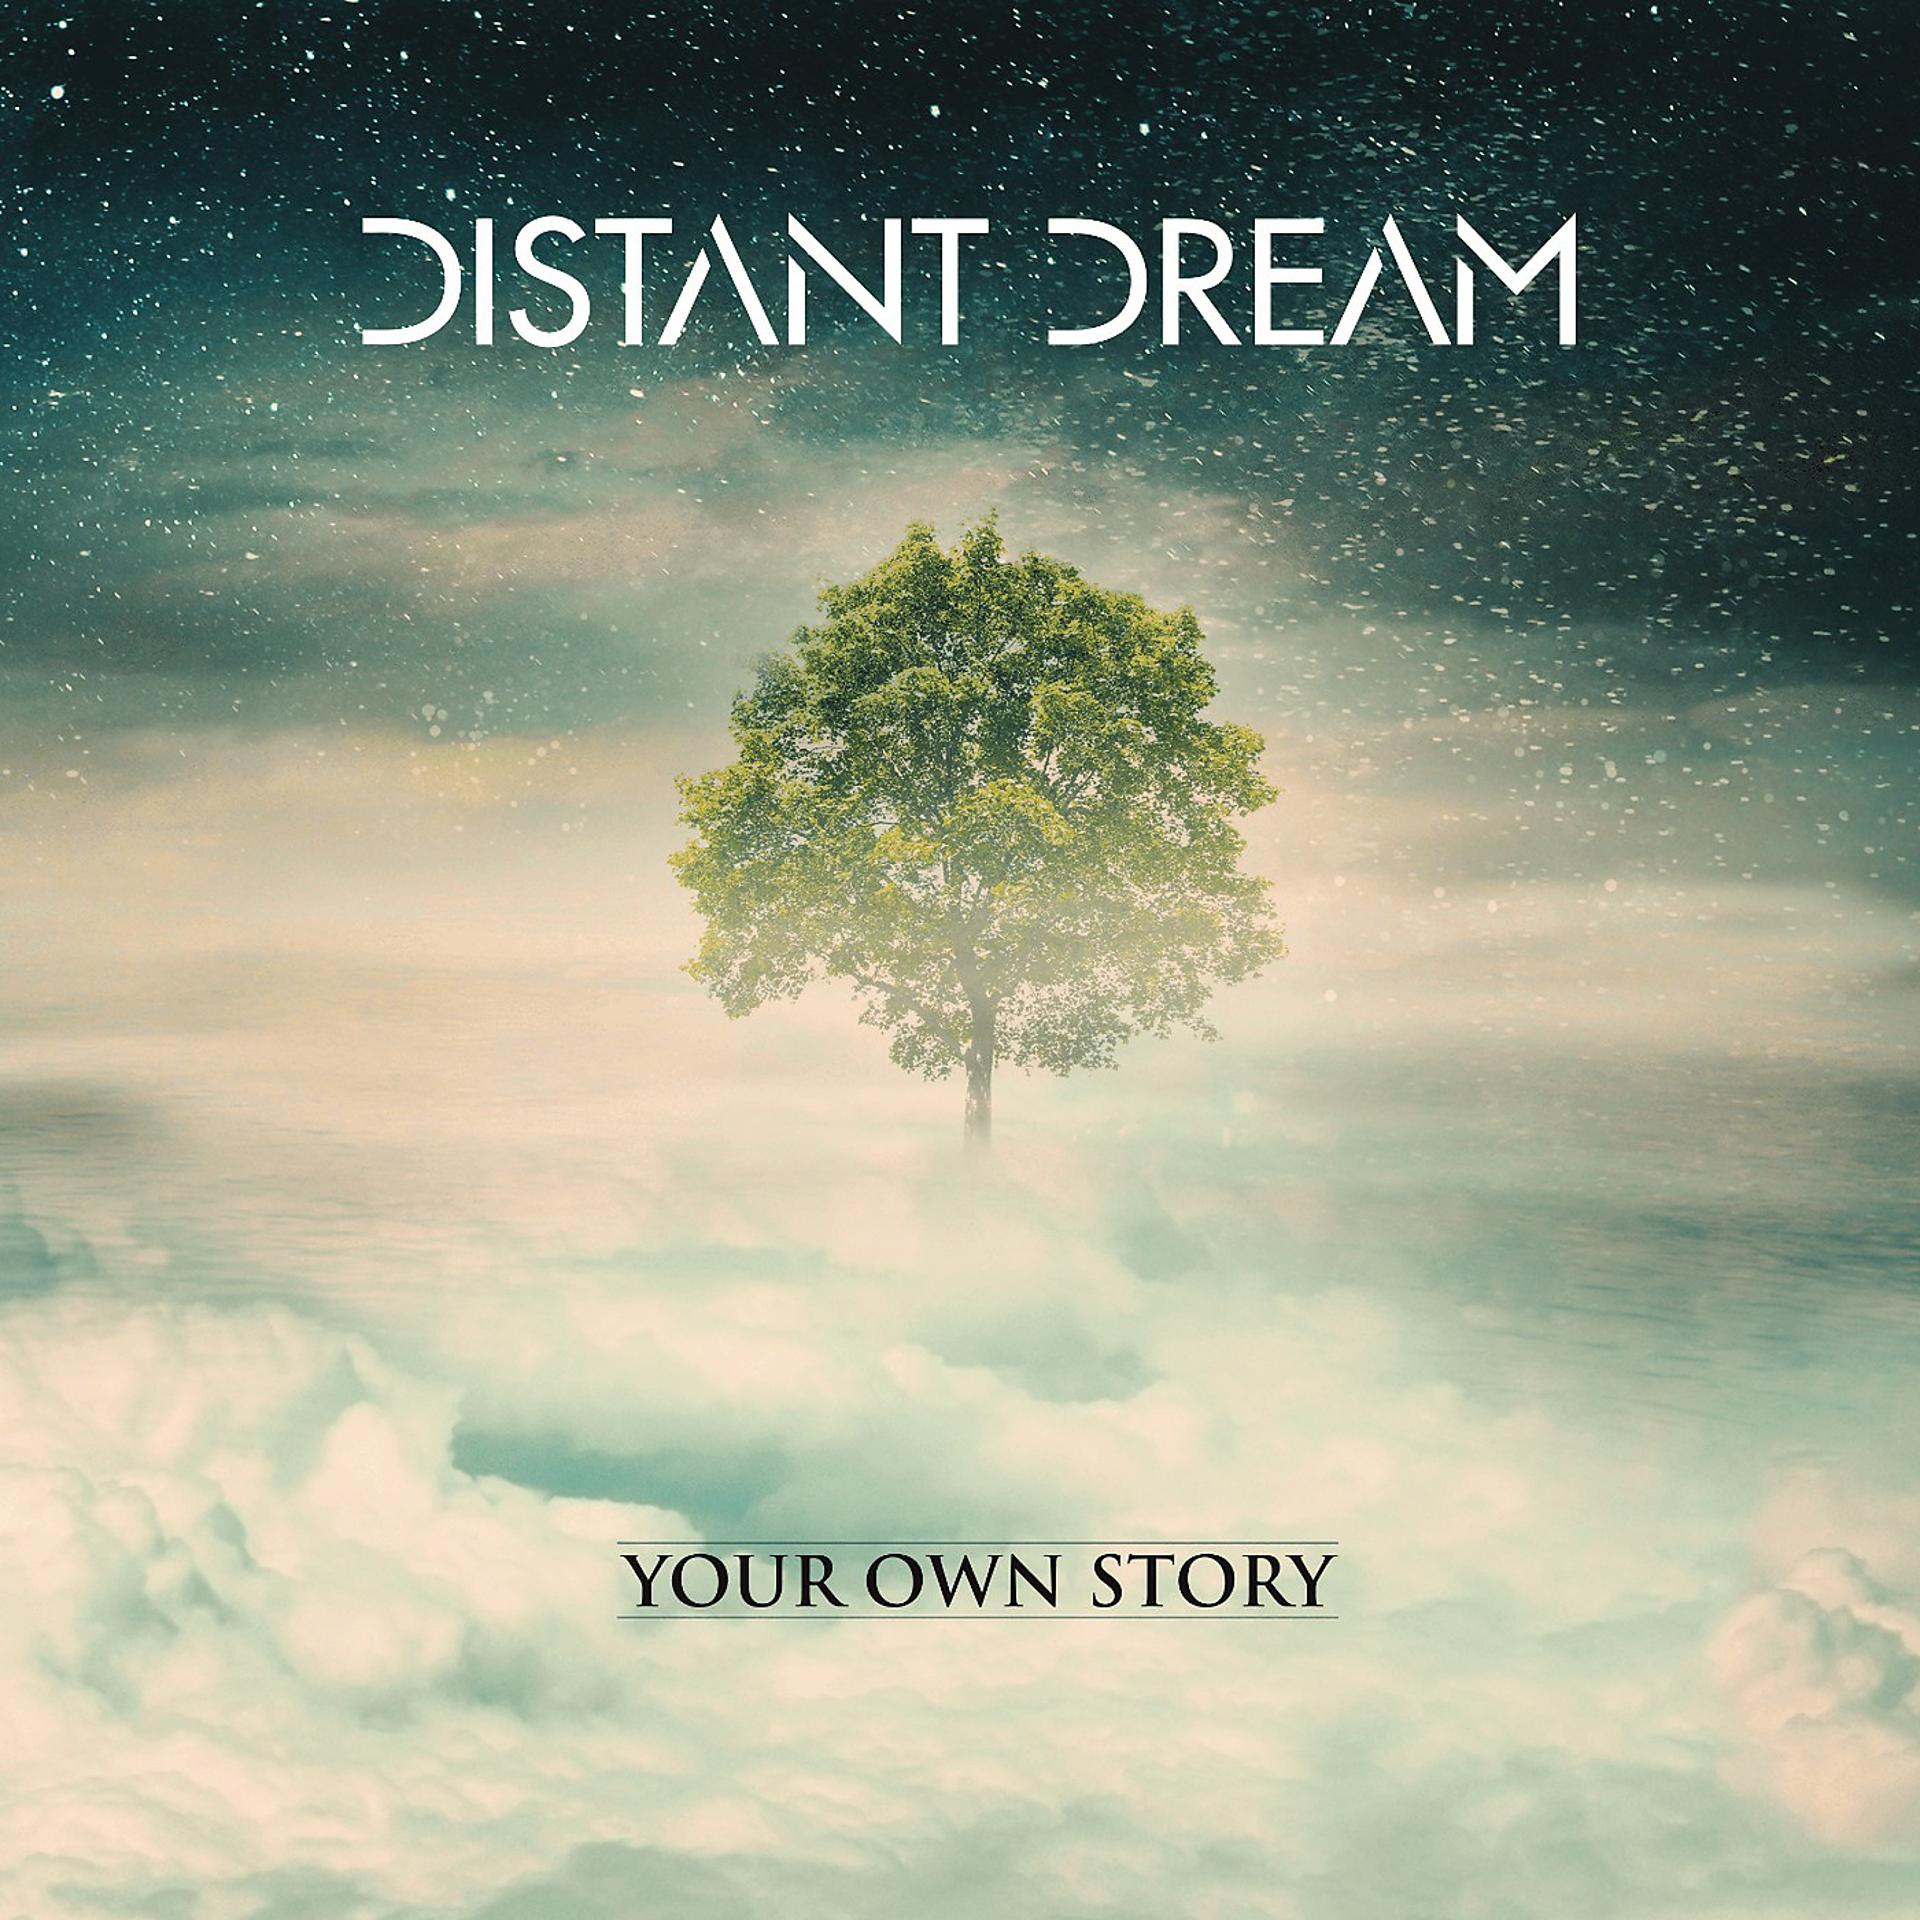 Distant Dream. Your own story Дистант Дрим. Группа distant Dream. Distant Dream it all starts from pieces. Dream each